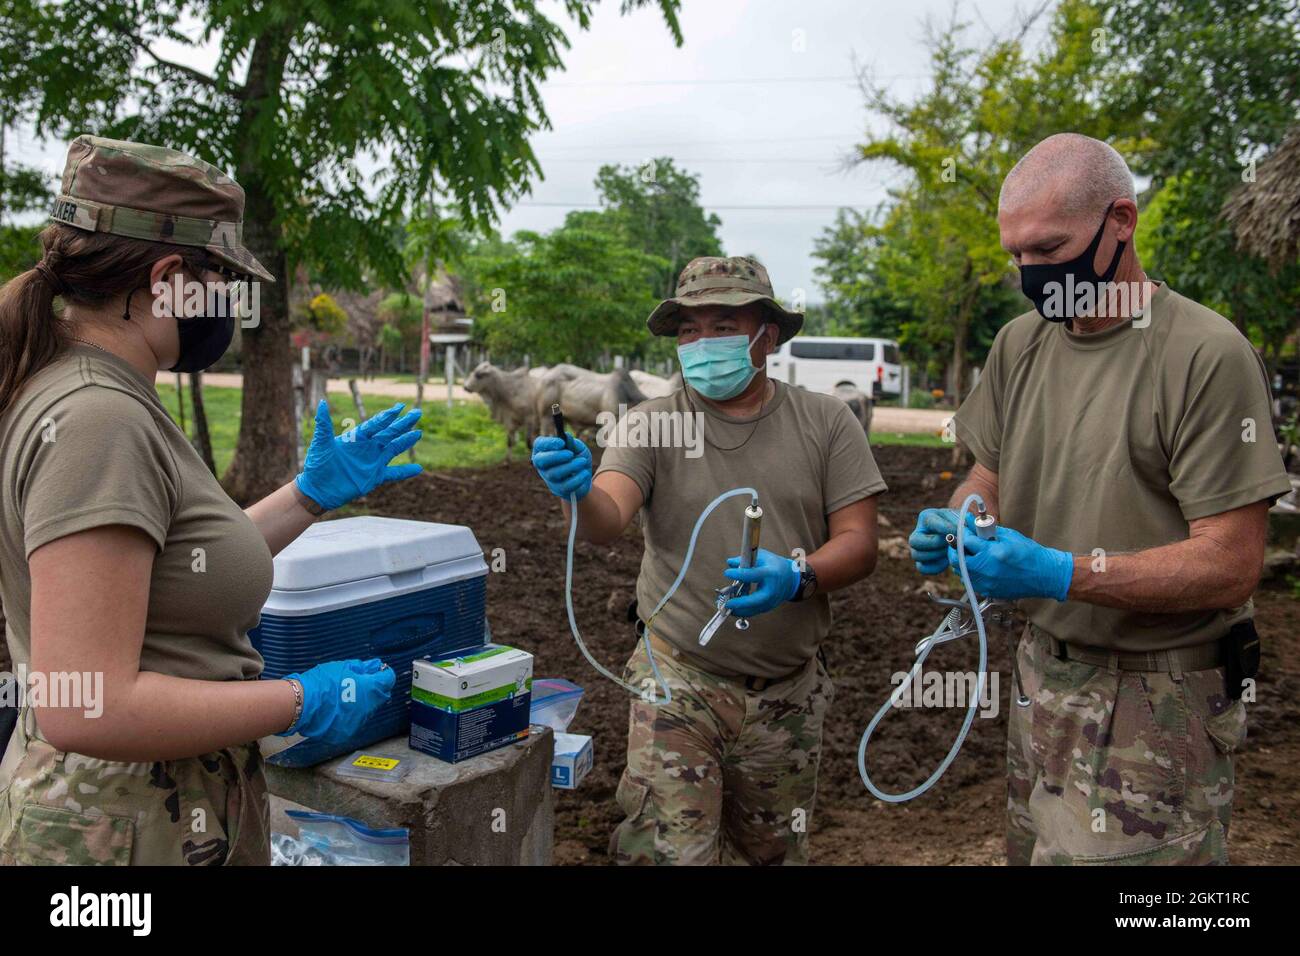 From right to left, U.S. Army Maj. Matthew Conlan, a veterinarian, and field veterinary service technicians, U.S. Army Staff Sgt. Rene Aventura and U.S. Army Pfc. Sonya Walker, all with the 109th Medical Detachment Veterinary Services out of Garden Grove, Calif., prepare to vaccinate cattle during Resolute Sentinel 21 in Melchor De Mencos, Guatemala, June 24, 2021. While here, the veterinary team will offer large animal care education and vaccinations at various locations during the exercise. Stock Photo